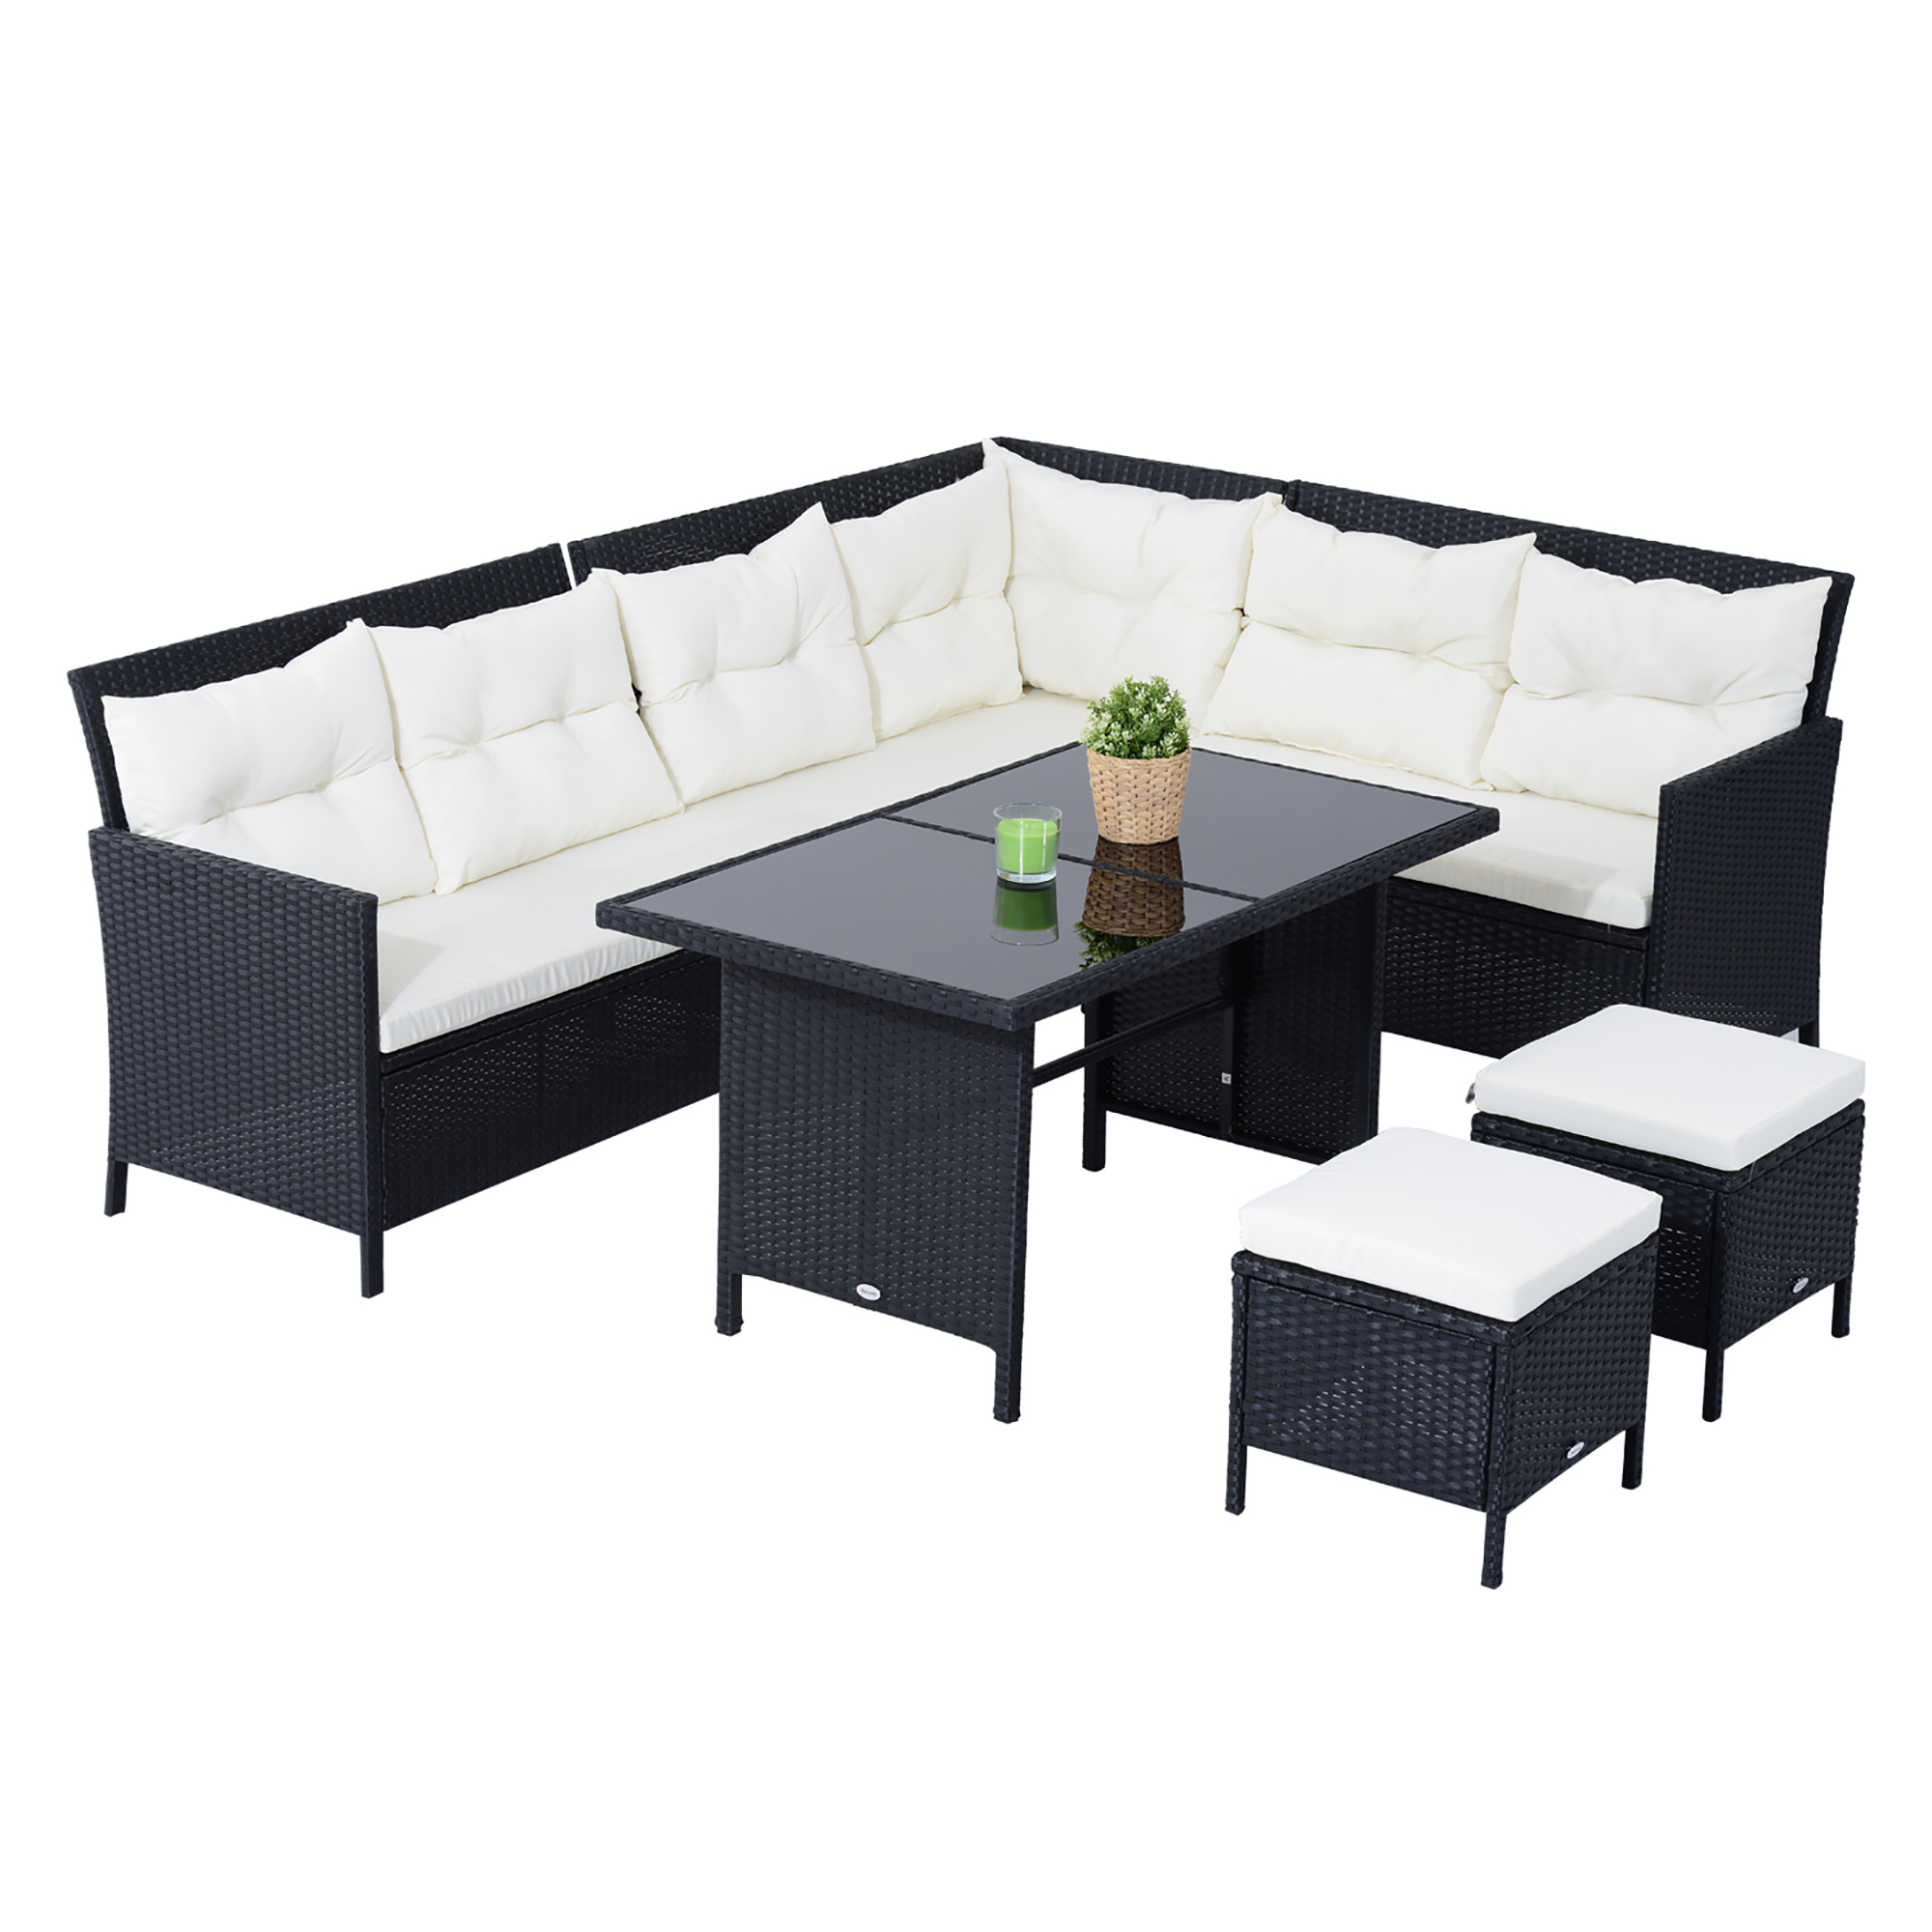 Outsunny Outdoor Garden PE Rattan Furniture Σετ Καναπές 6 τεμαχίων με μαξιλάρια και βοηθητικό τραπέζι